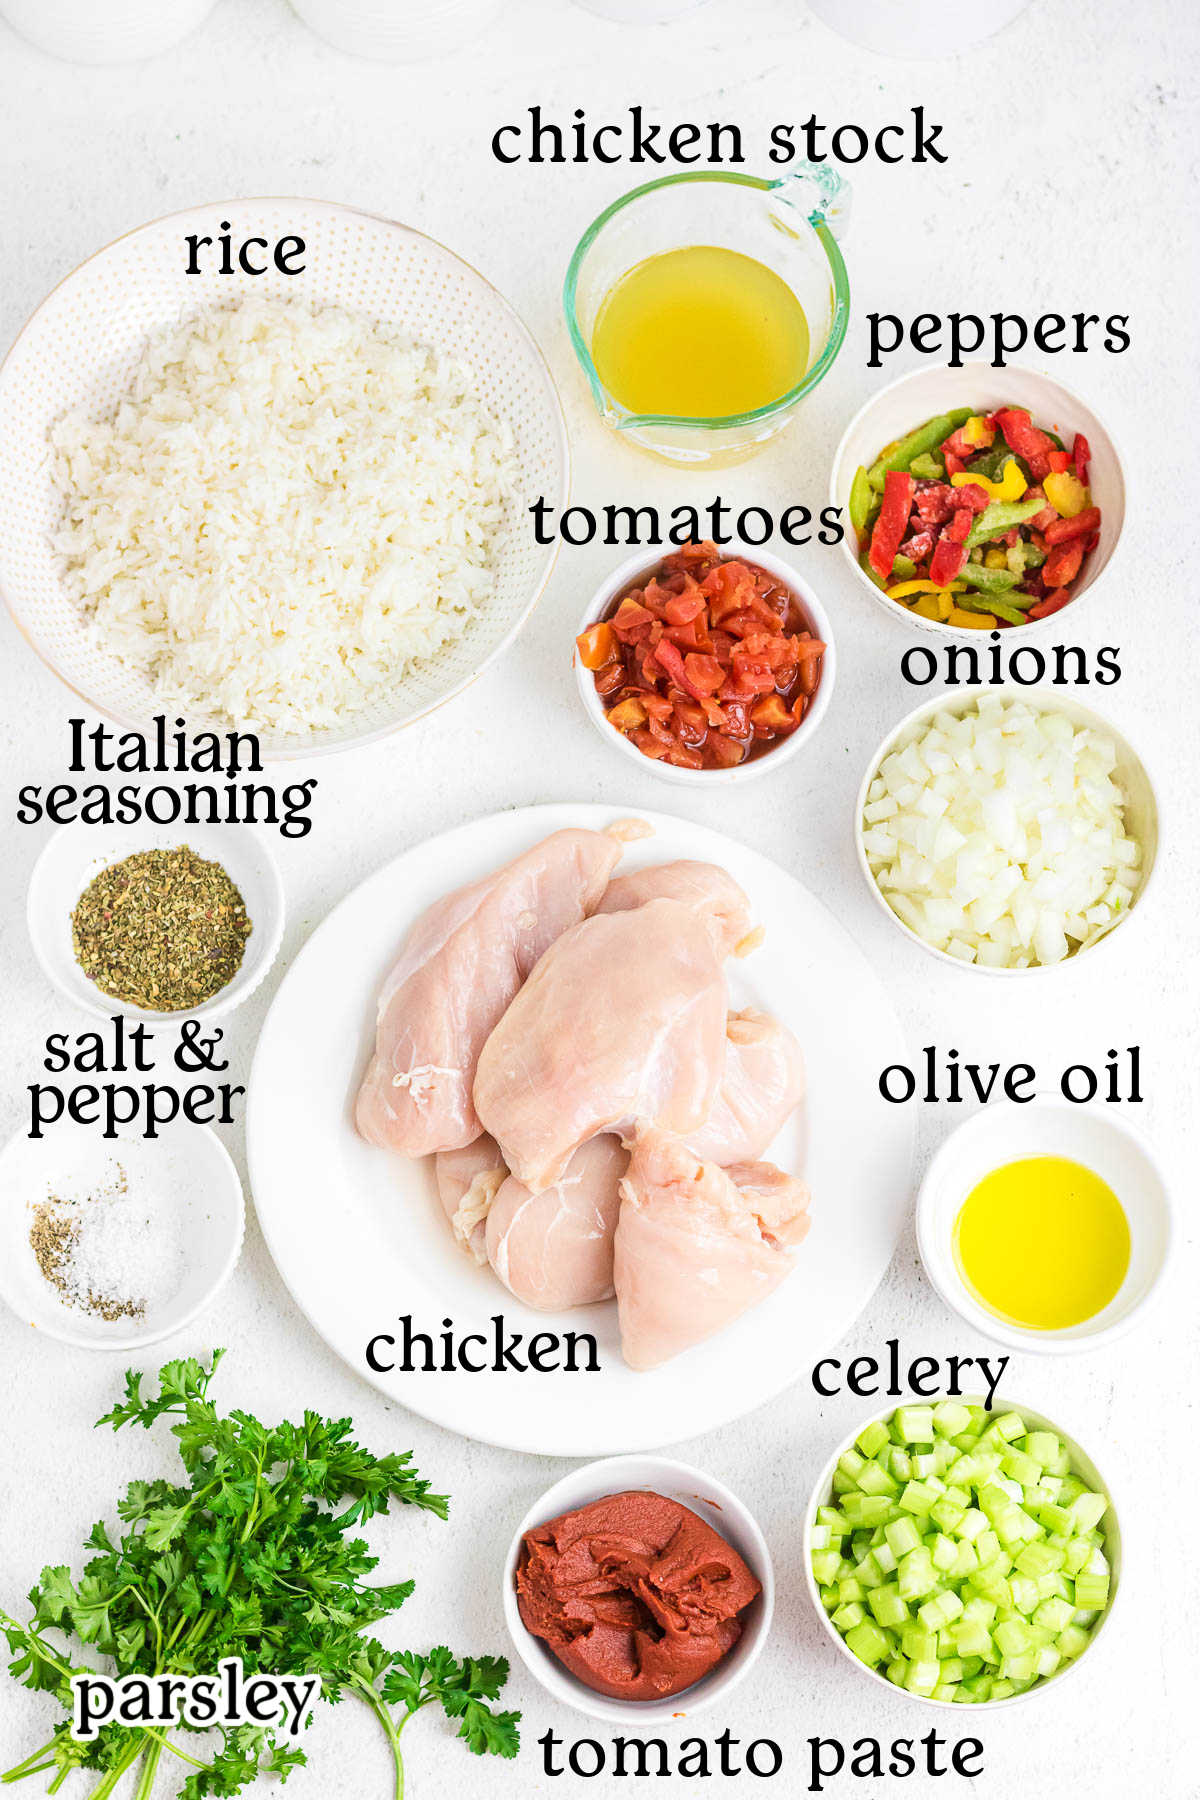 The recipe ingredients with text overlay.